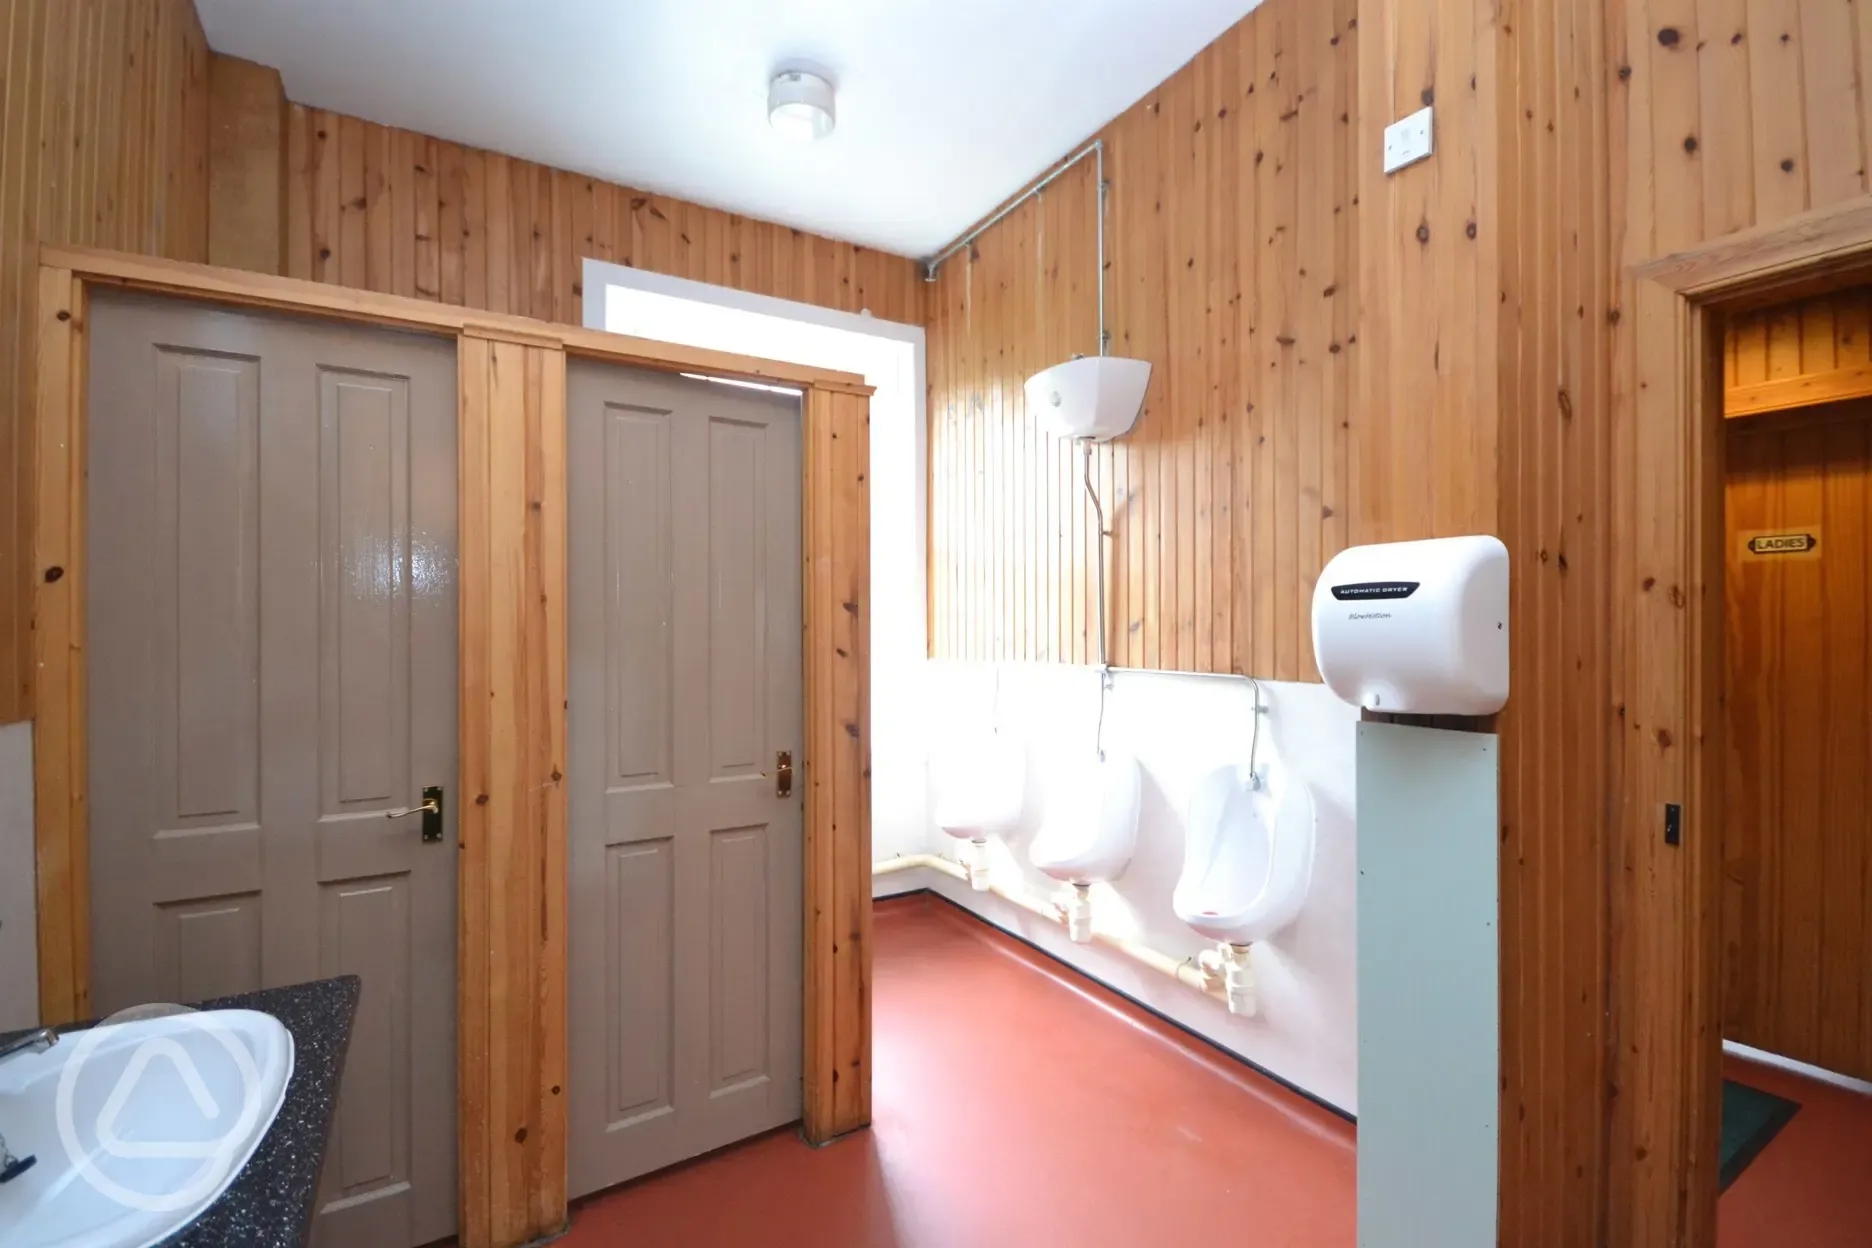 Shower and toilet block